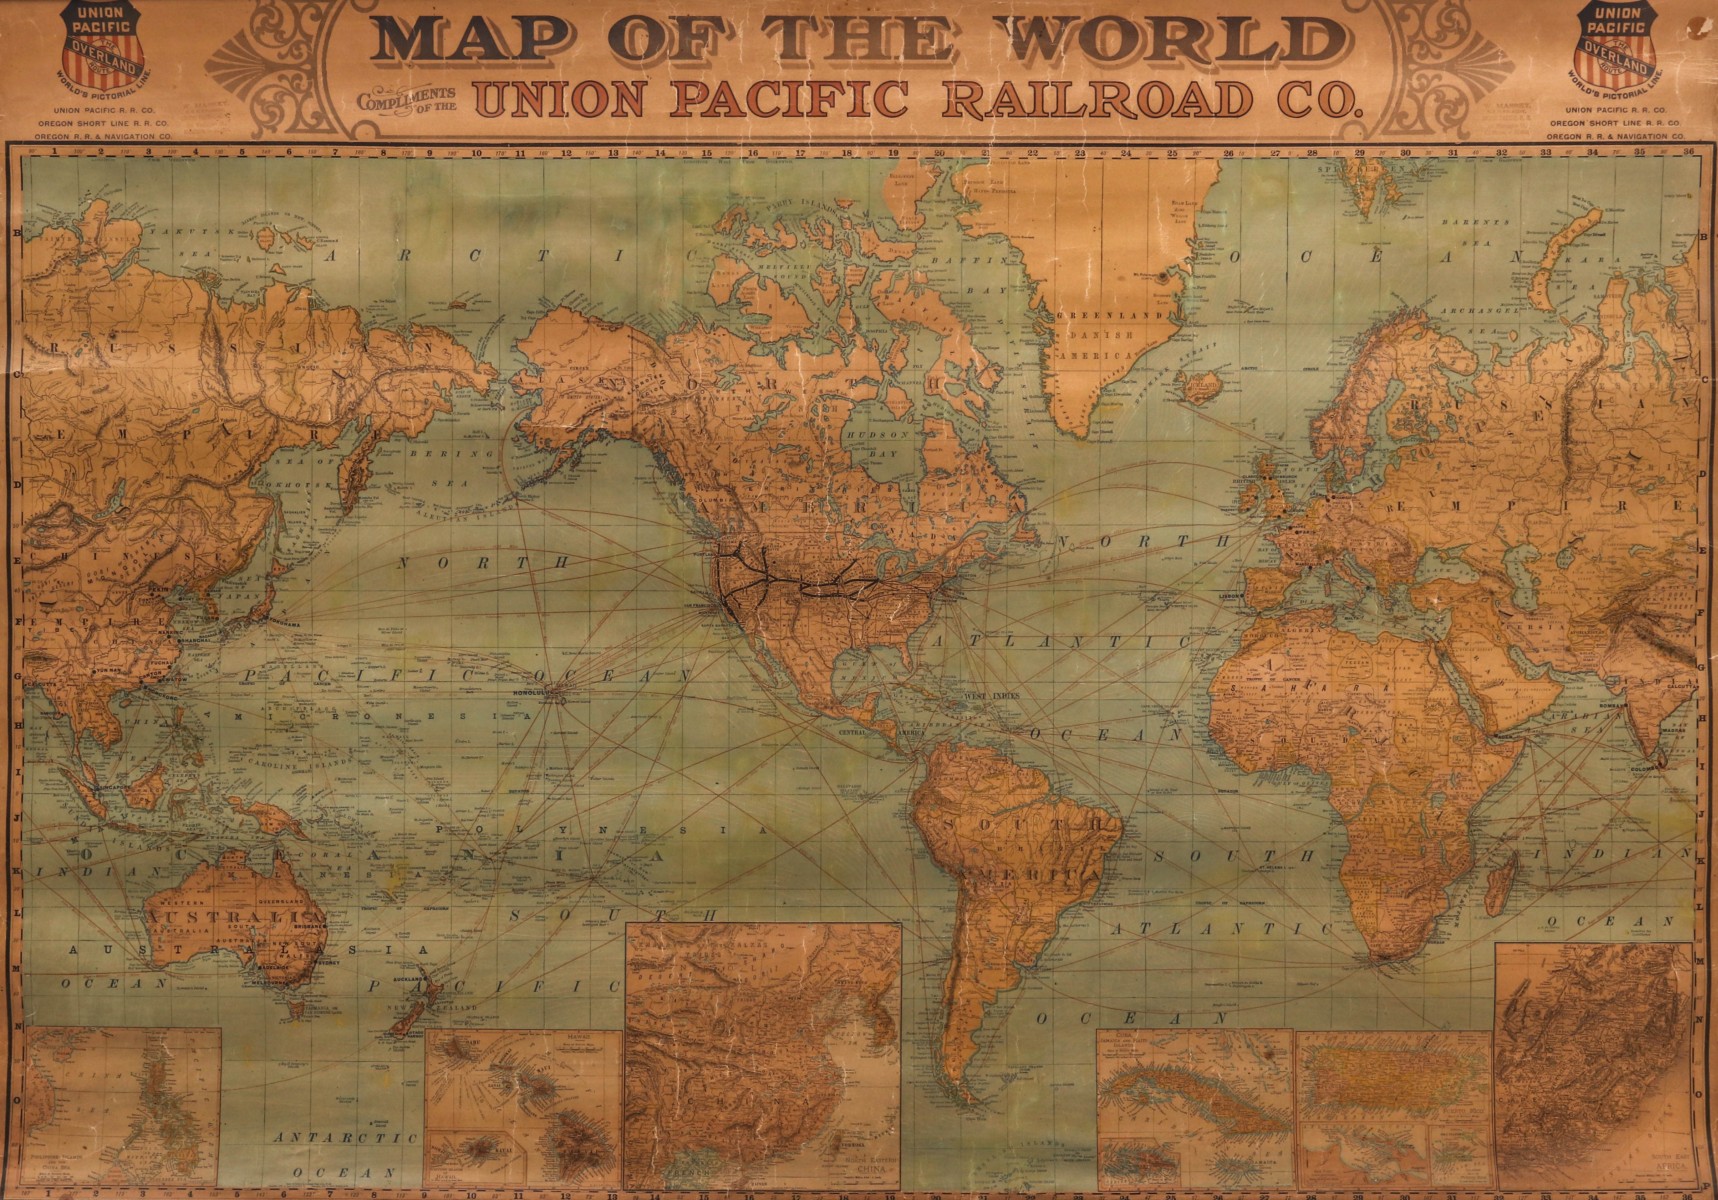 A UNION PACIFIC RAILROAD 'MAP OF THE WORLD' DATED 1899